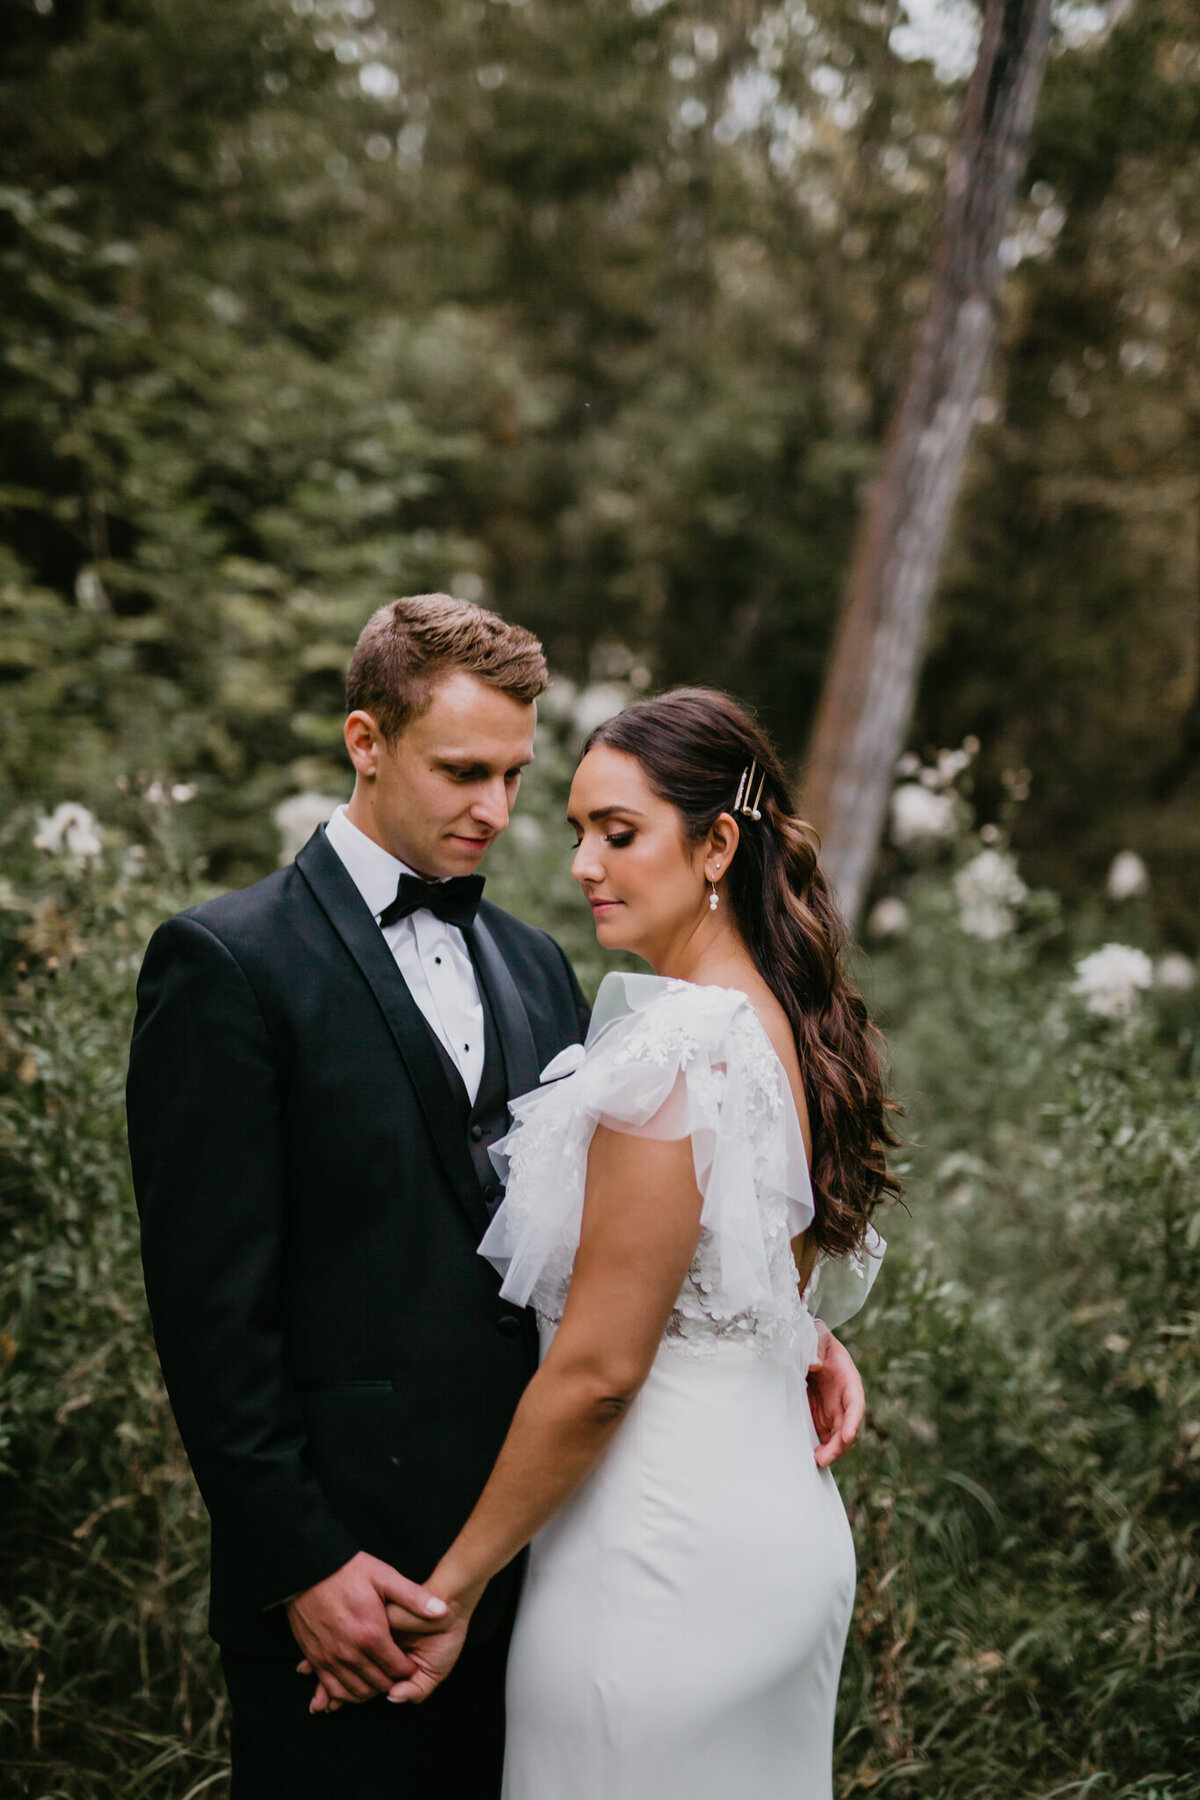 Elegant portrait of bride and groom in the trees captured by Nikki Collette Photography, adventurous and romantic wedding photographer in Red Deer, Alberta. Featured on the Bronte Bride Vendor Guide.